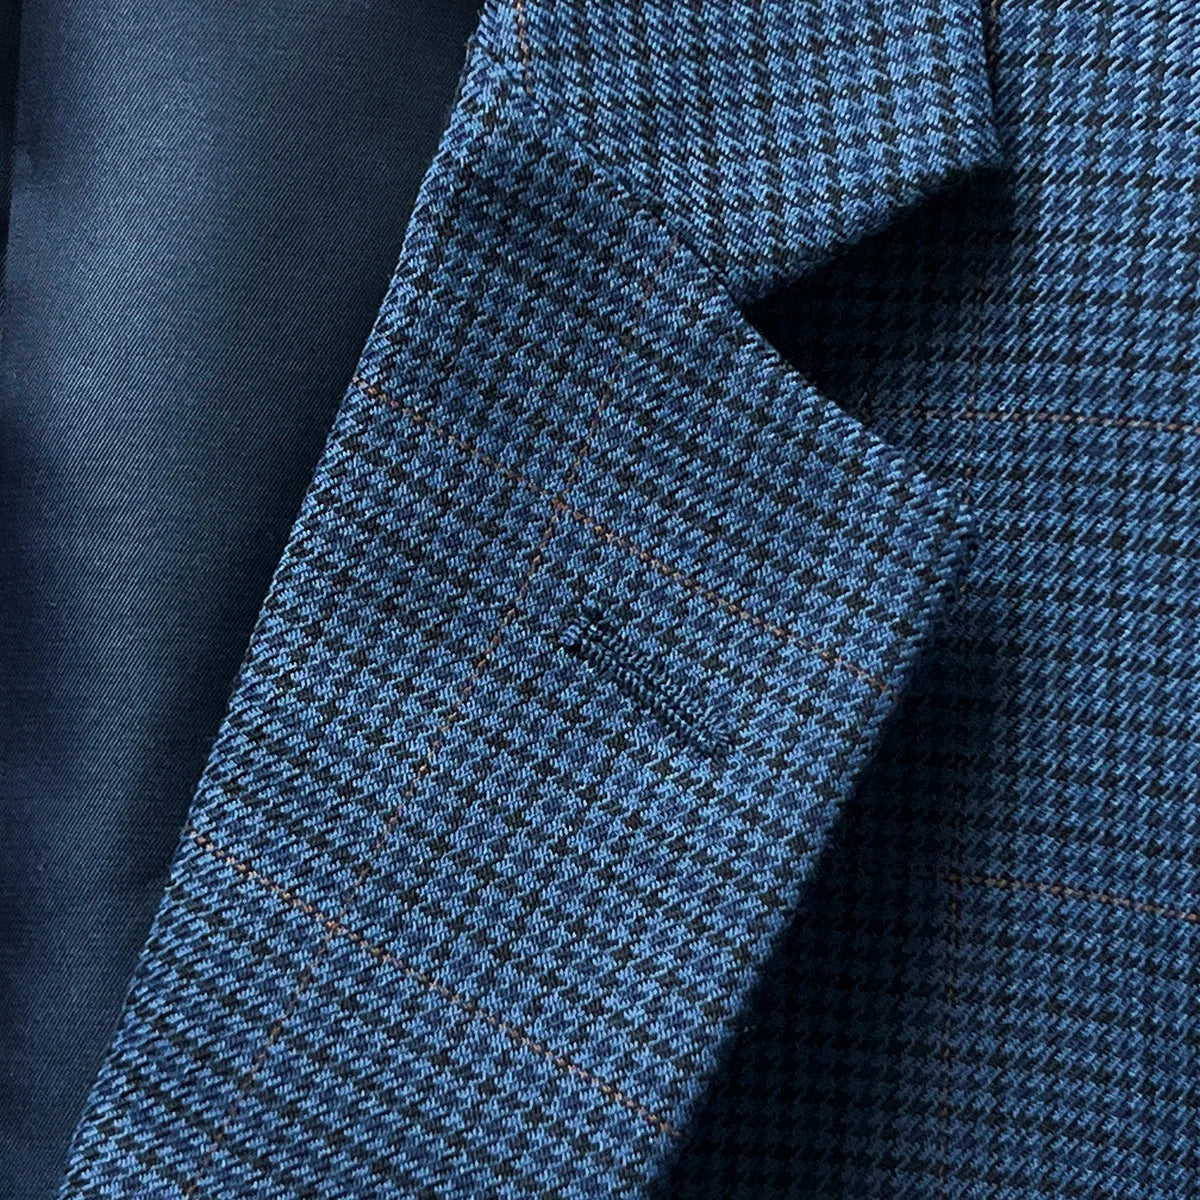 Detailed view of the notch lapel on the prussian blue suit jacket, featuring meticulous tailoring and a sharp finish.